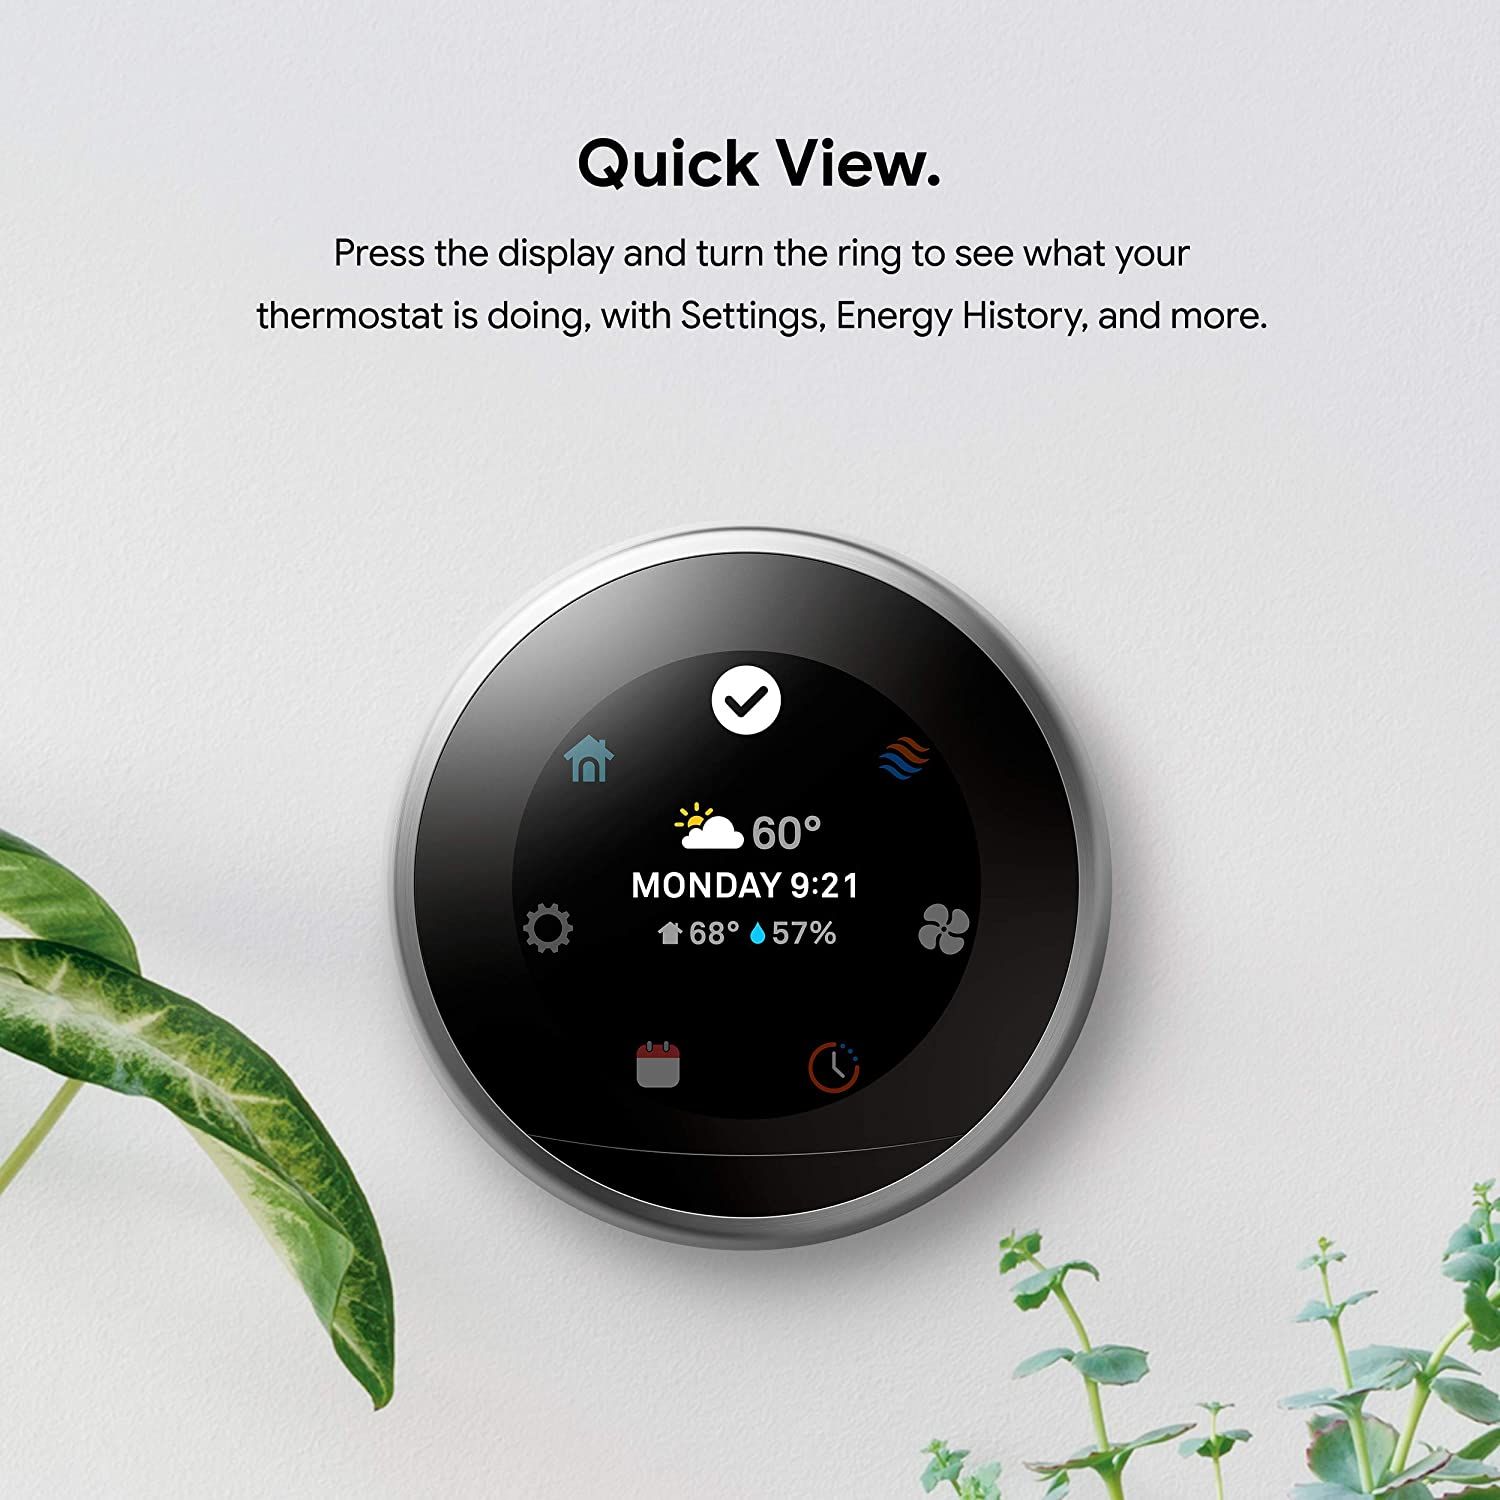 An image showing Google Nest Learning thermostat complete display